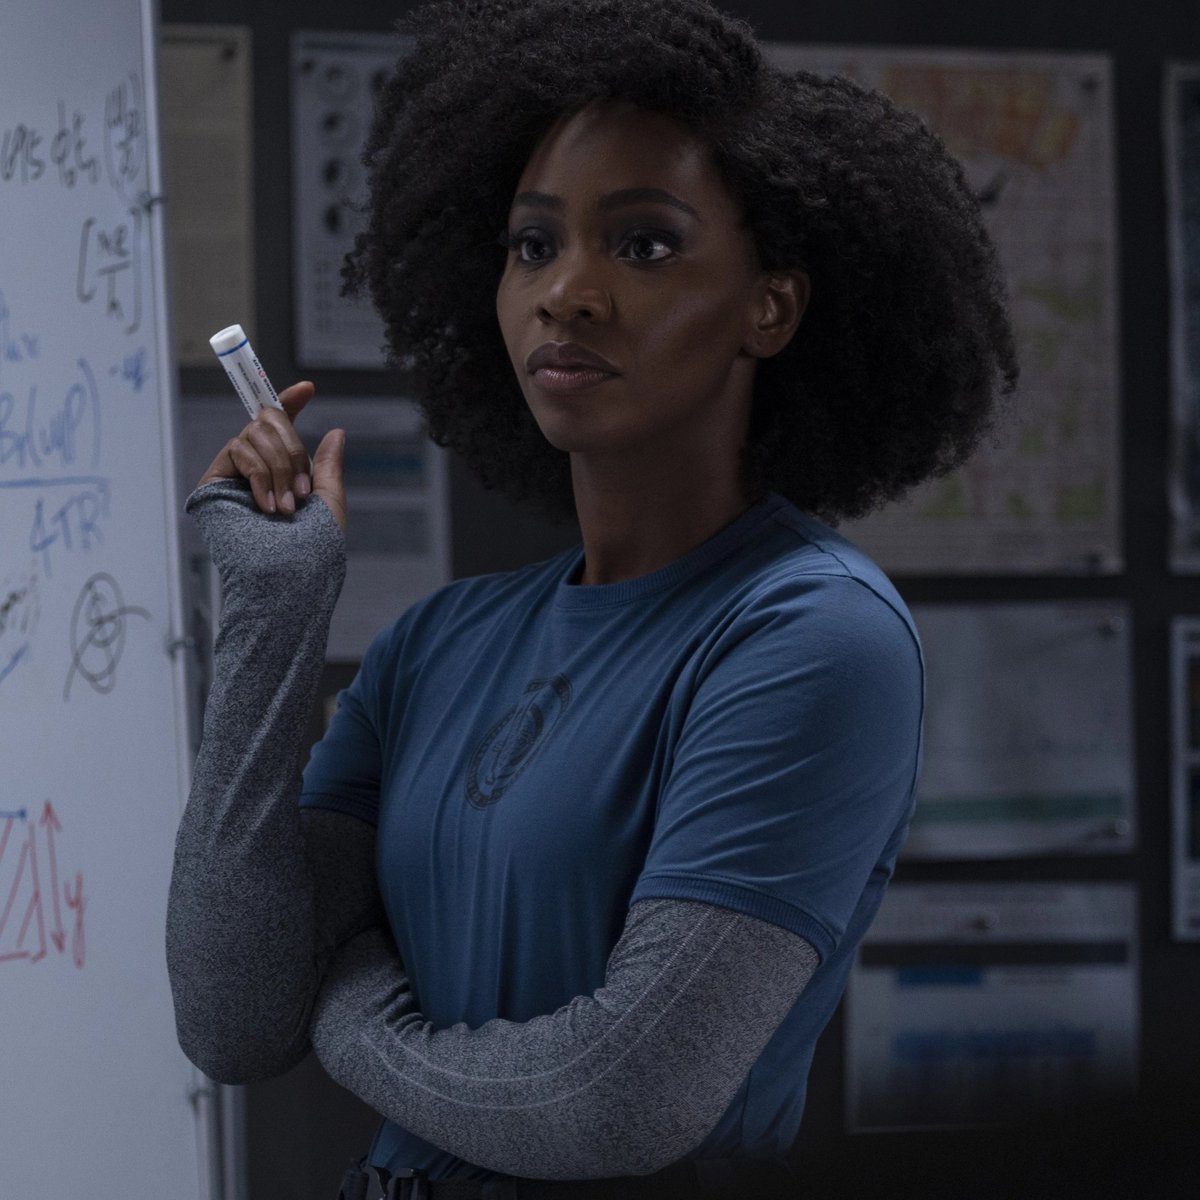 Teyonah Parris is hyping up #WandaVision's aerospace engineer reveal&q...